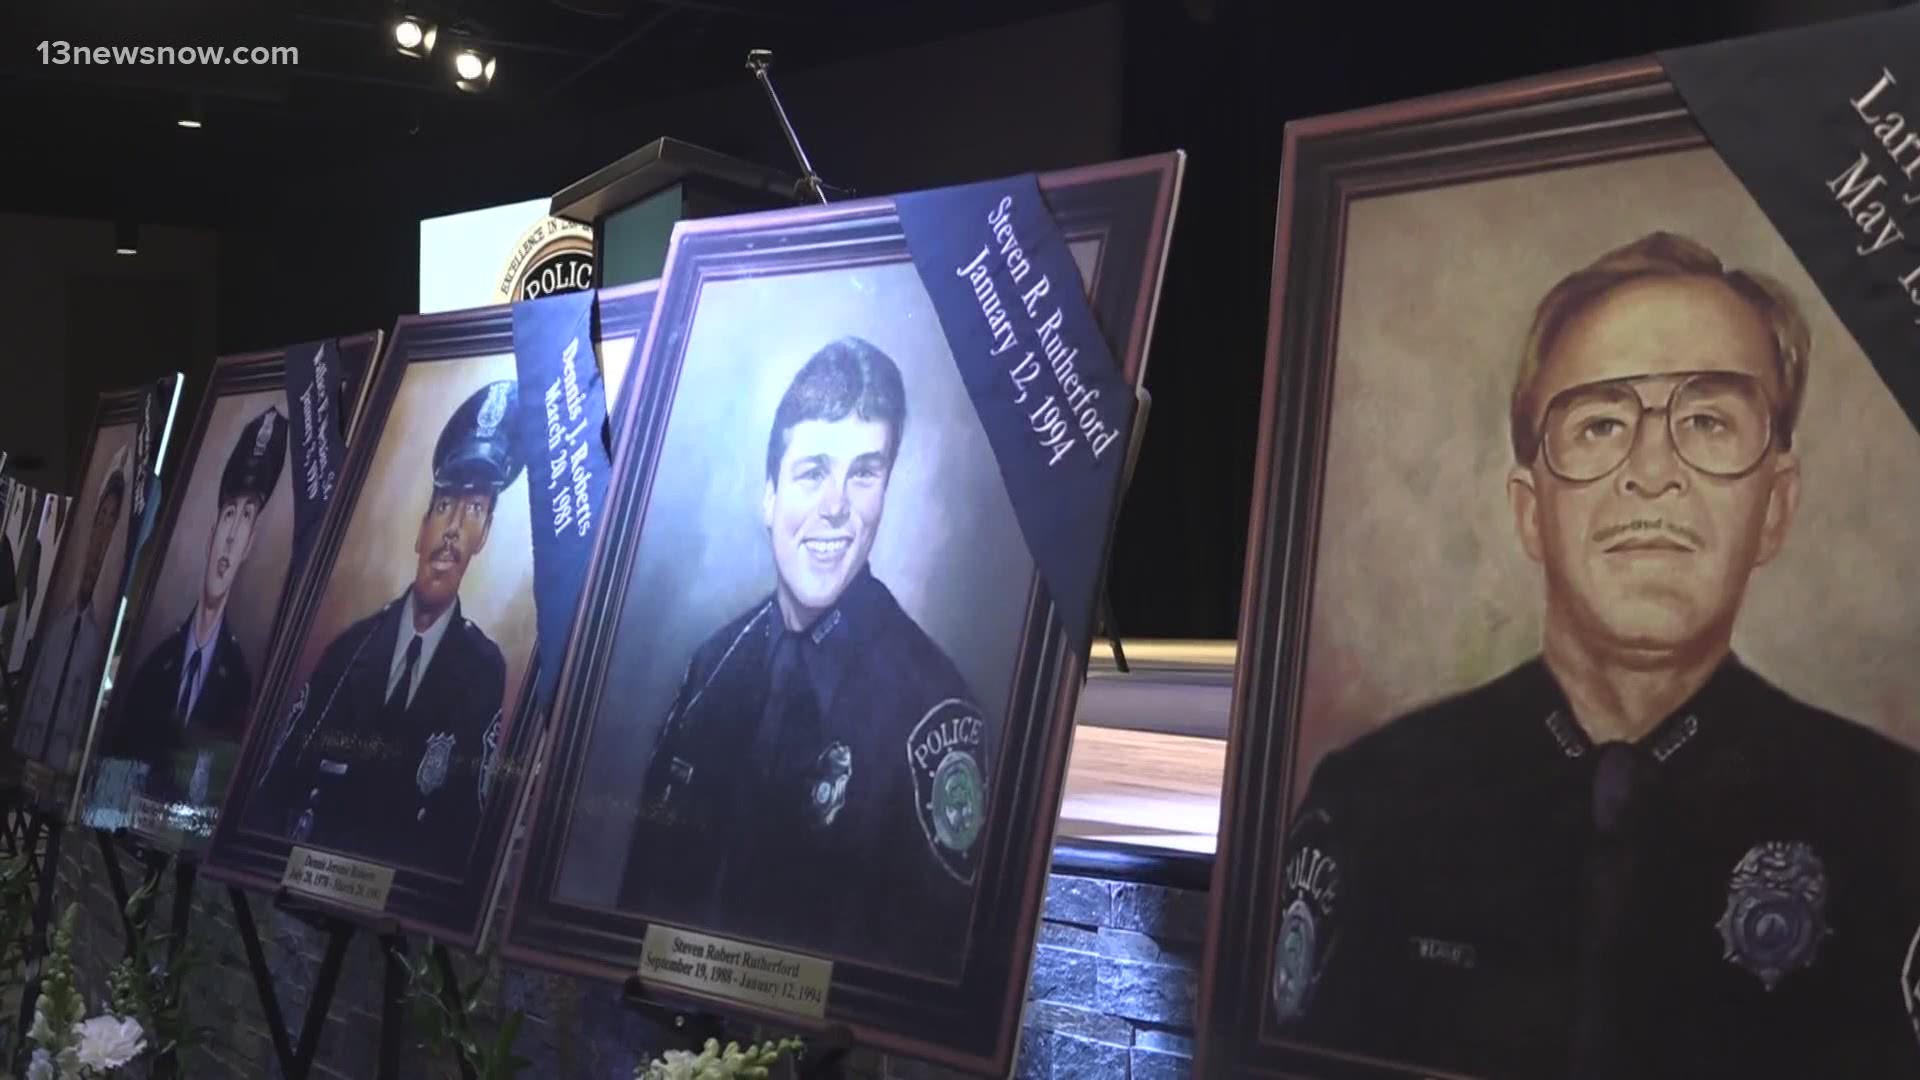 Twelve Newport News Police officers have made the ultimate sacrifice. The most recent, in January, when Officer Katie Thyne was killed during a traffic stop.